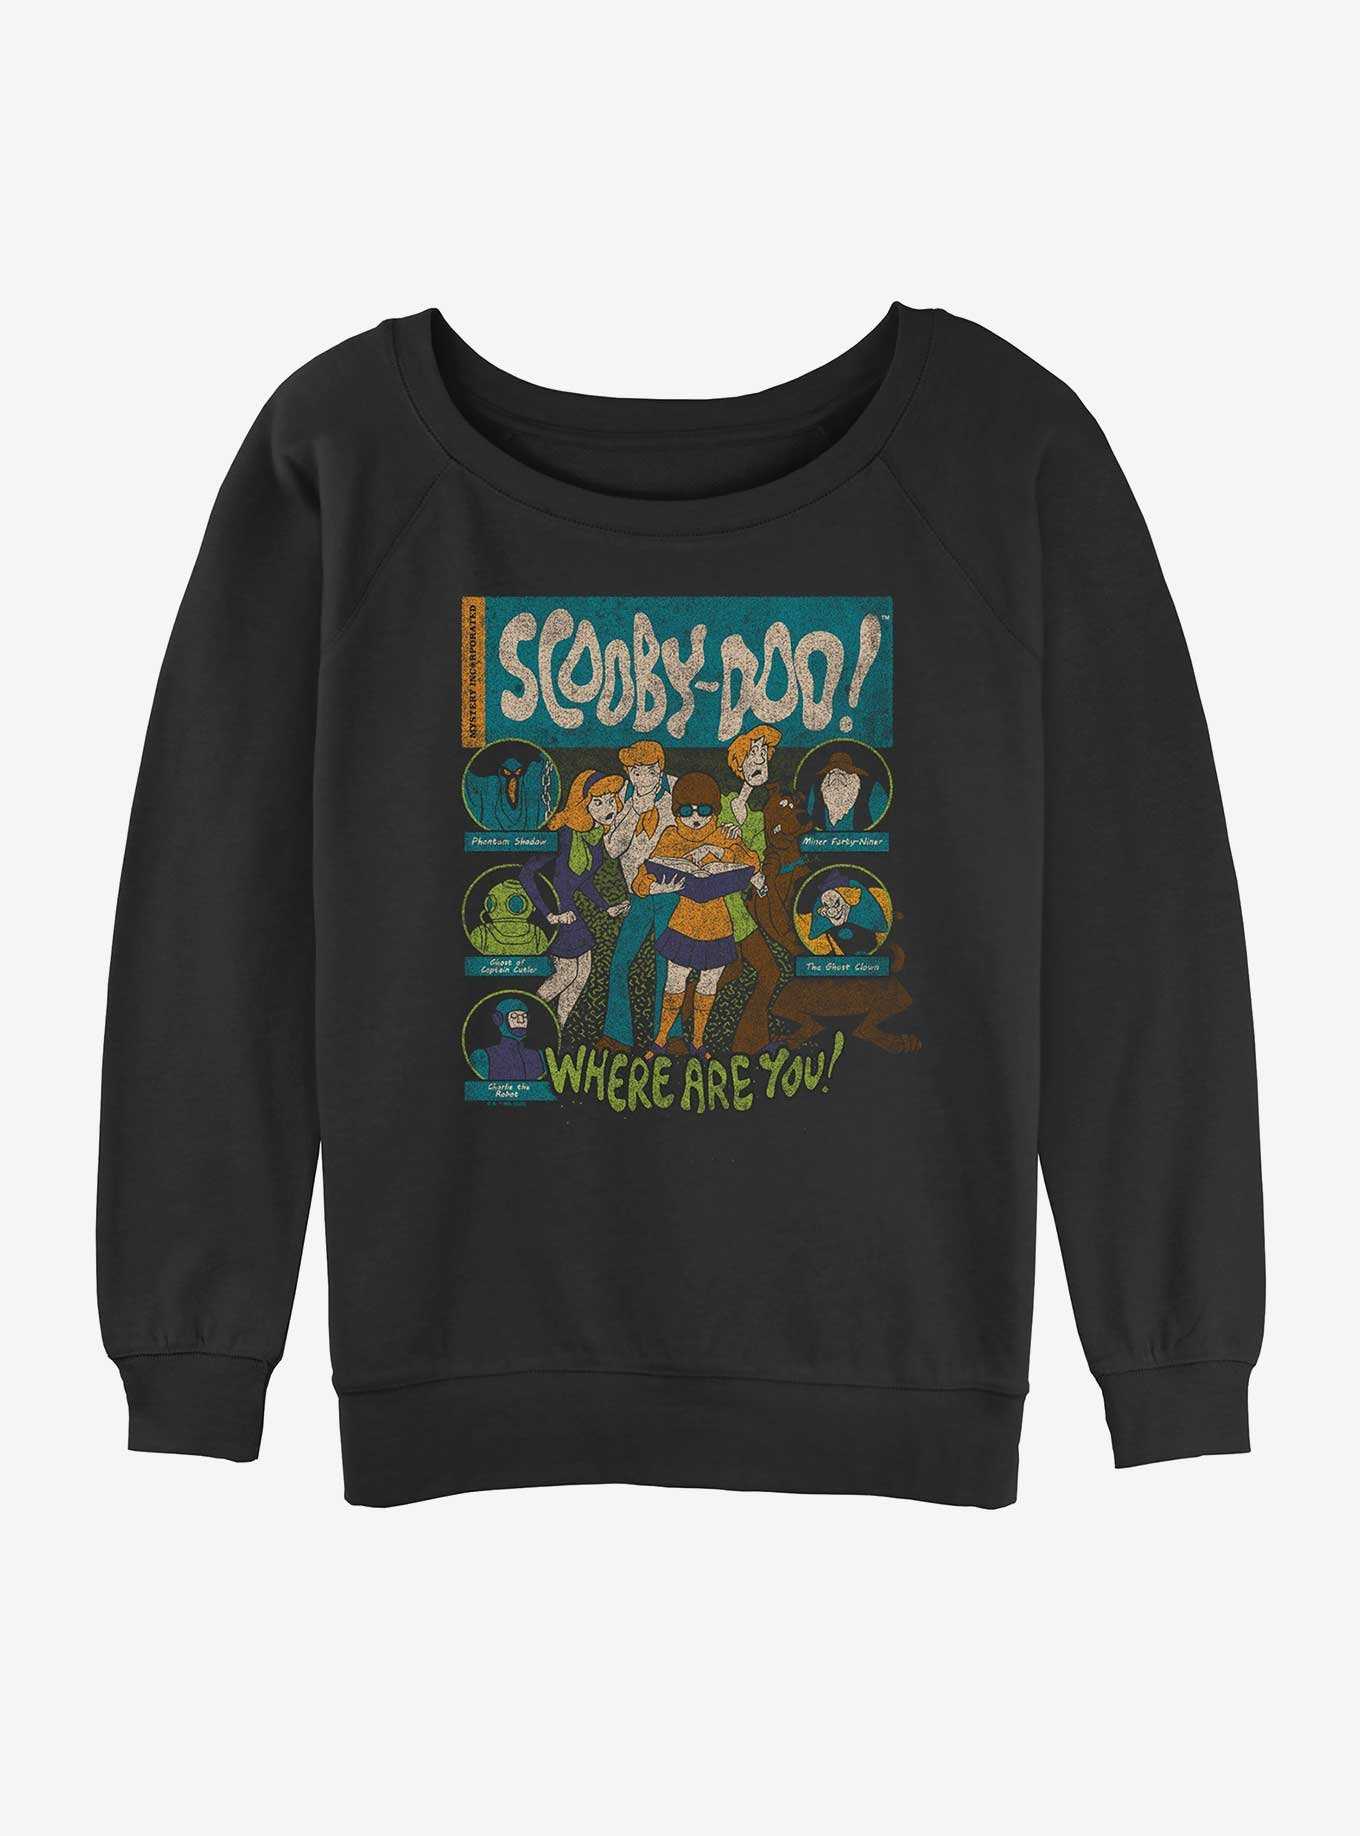 OFFICIAL Scooby-Doo Hoodies & Sweaters Gifts | BoxLunch